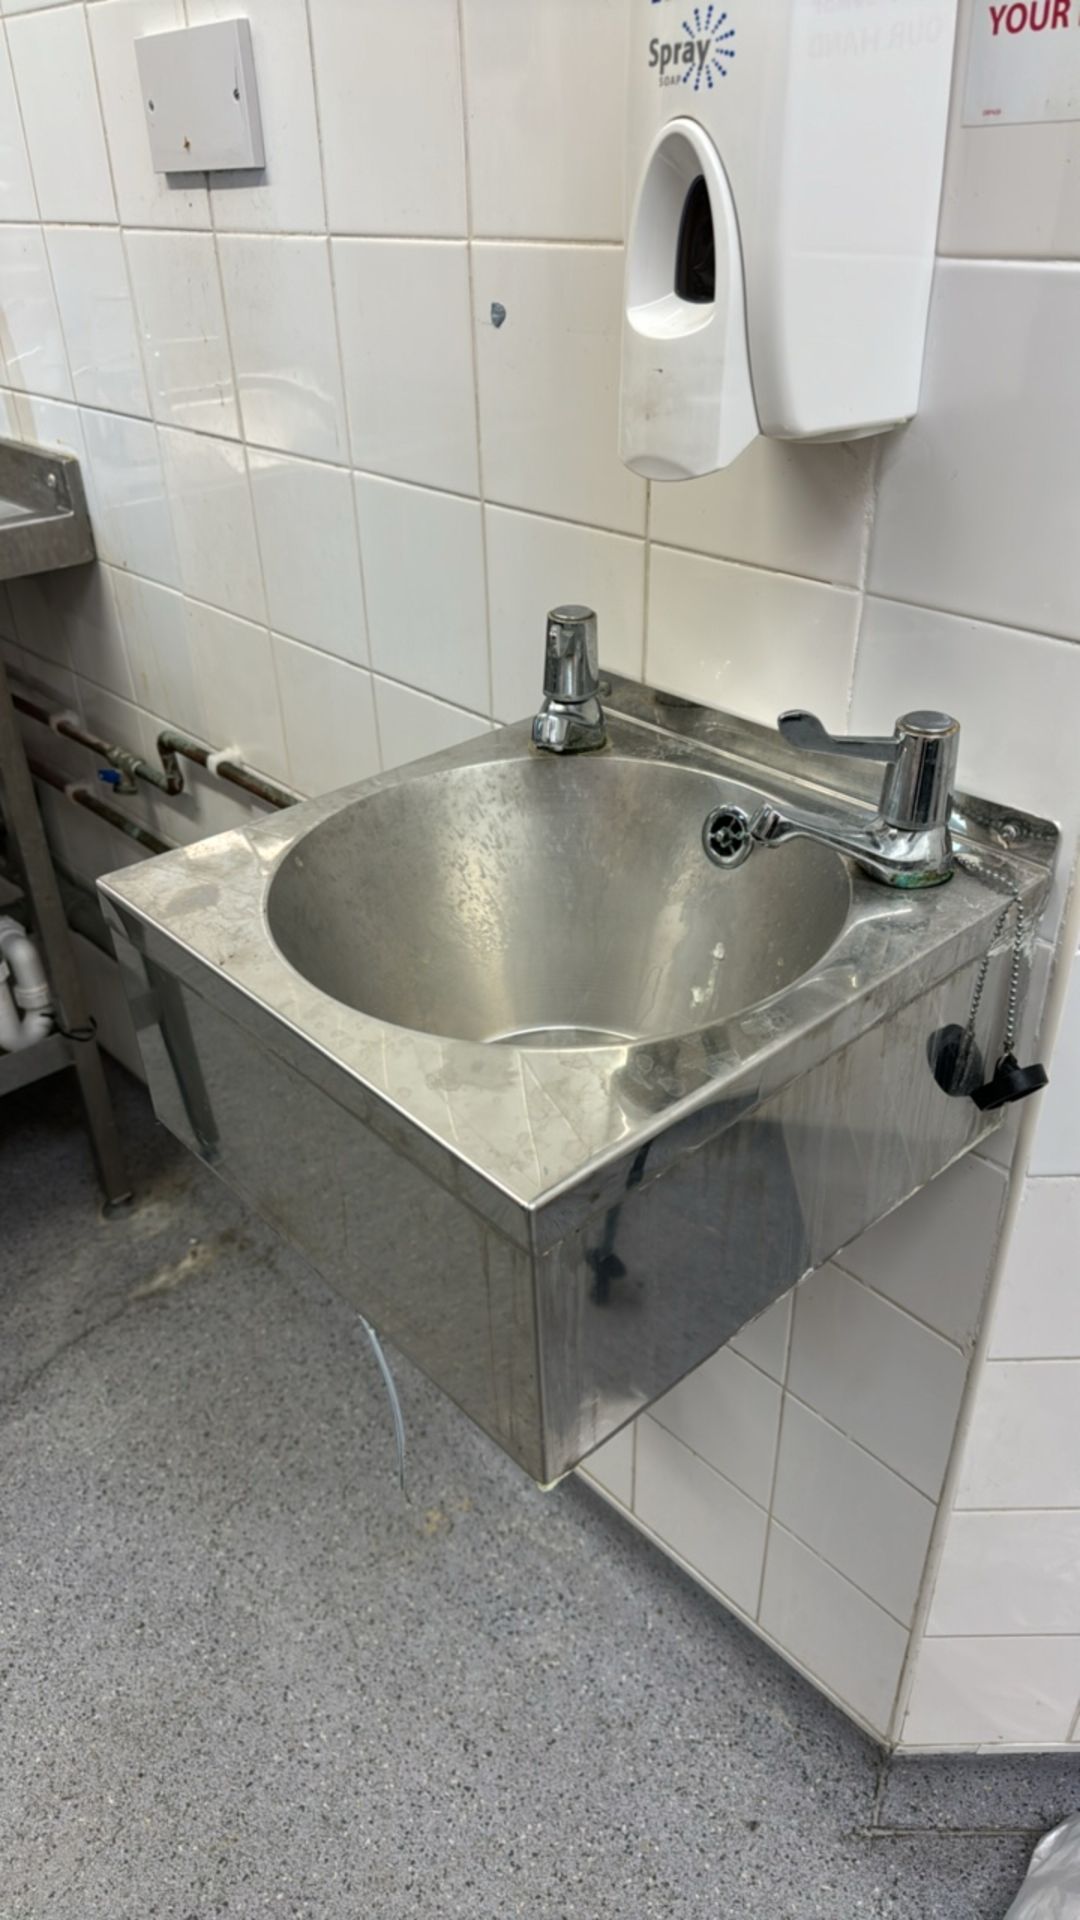 Stainless Steel Wall Sink - Image 2 of 3